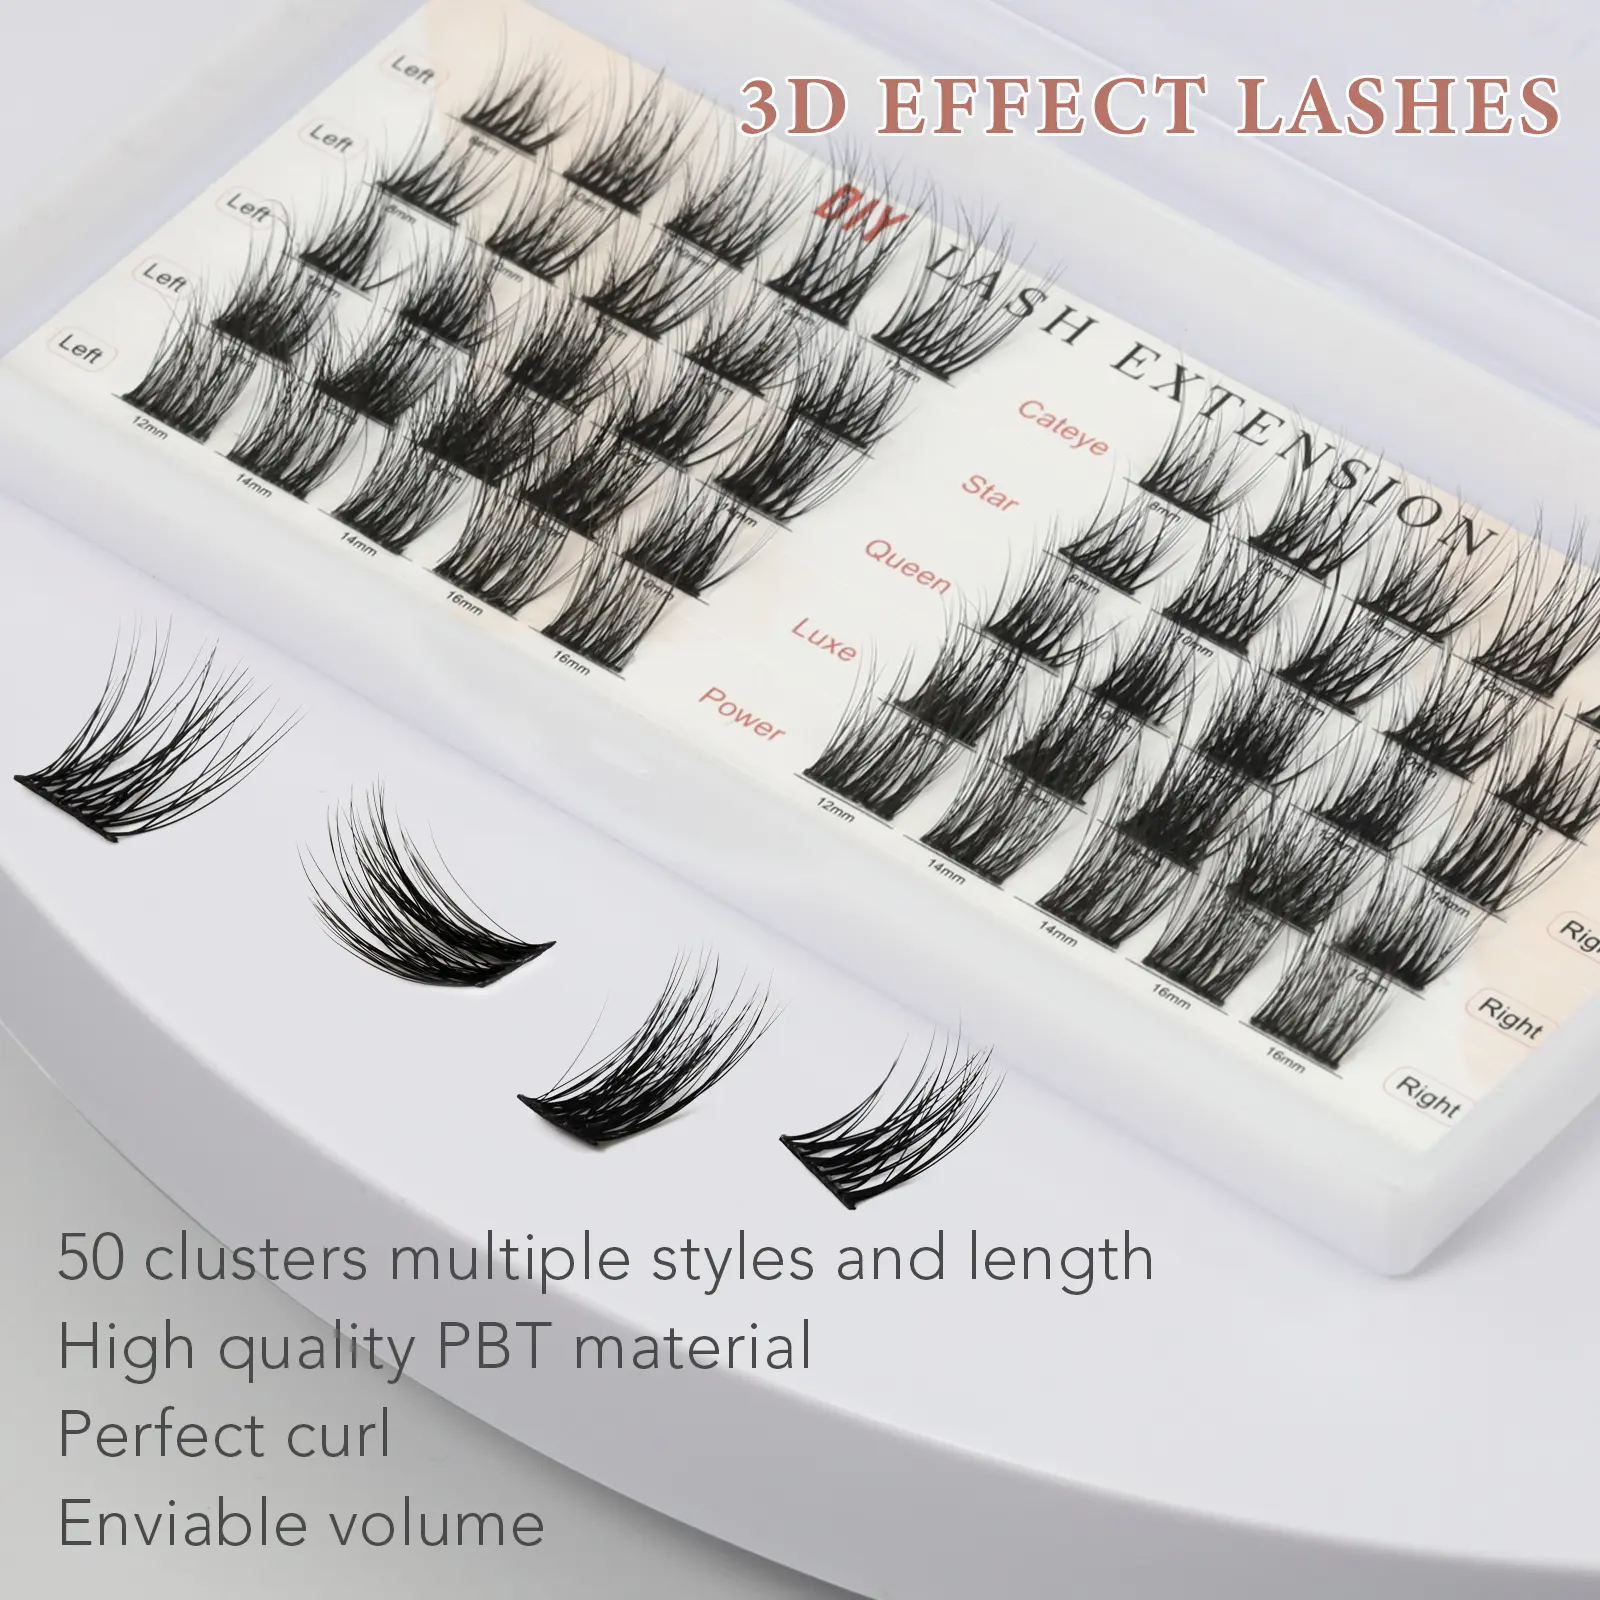 DIY lash extension easy at home high quality  suitable to wear  new style new possibility